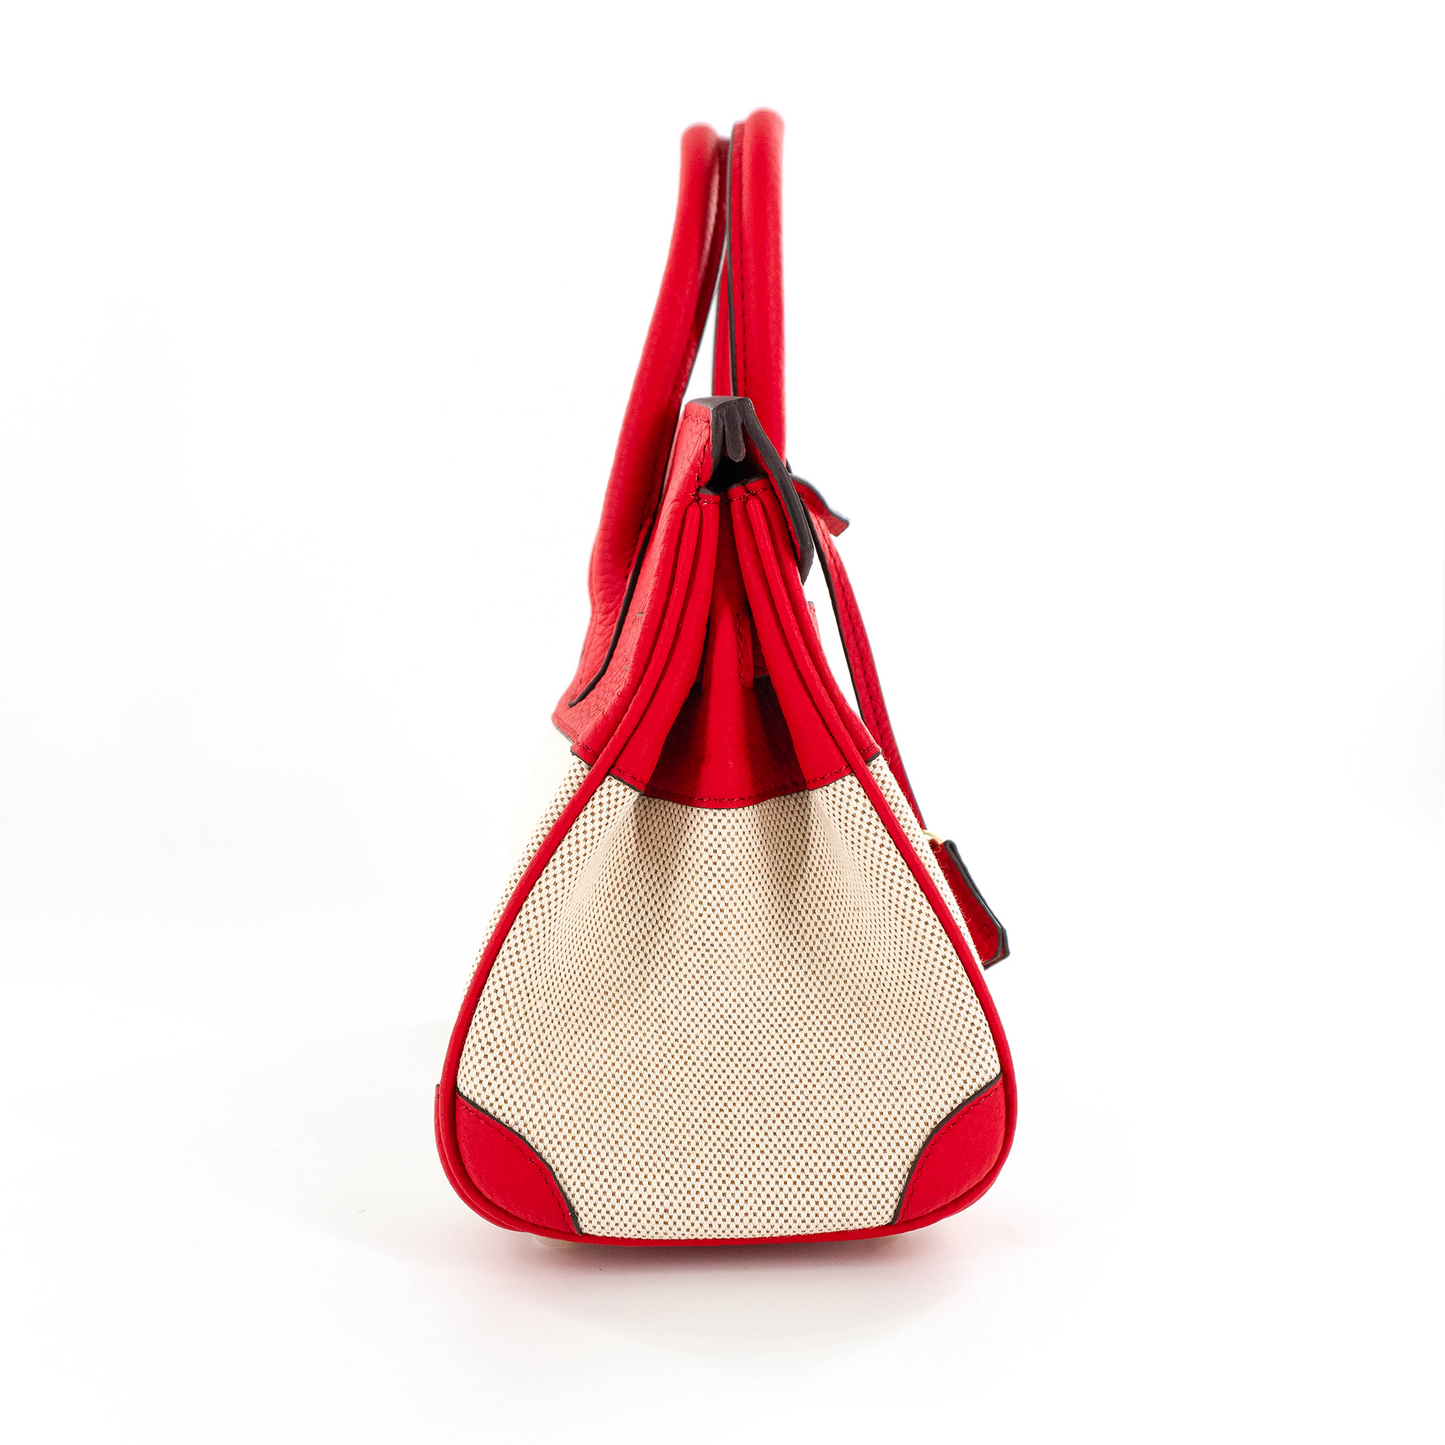 Duchess Handbag in Canvas and Red Leather